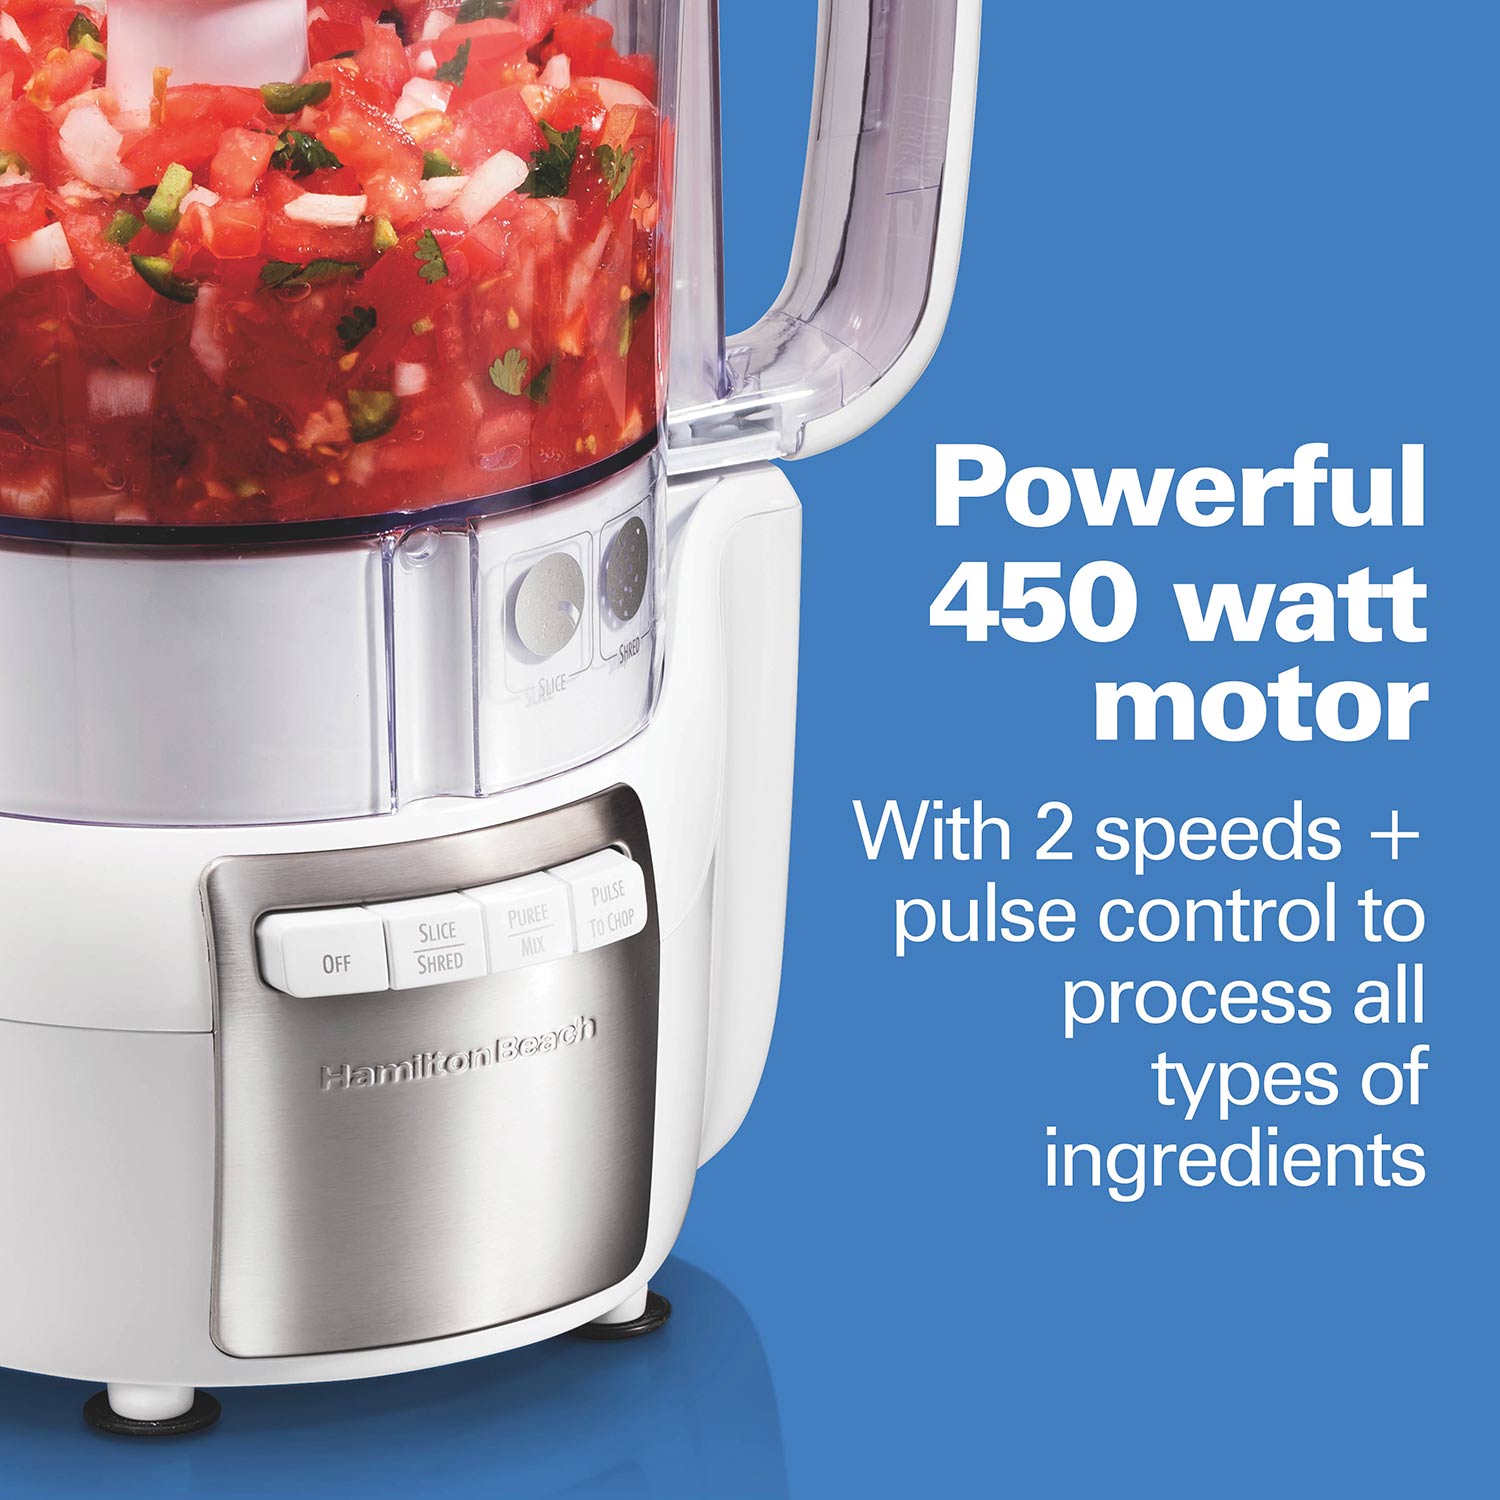 Hamilton Beach 10-Cup Stack & Snap Food Processor with Big Mouth